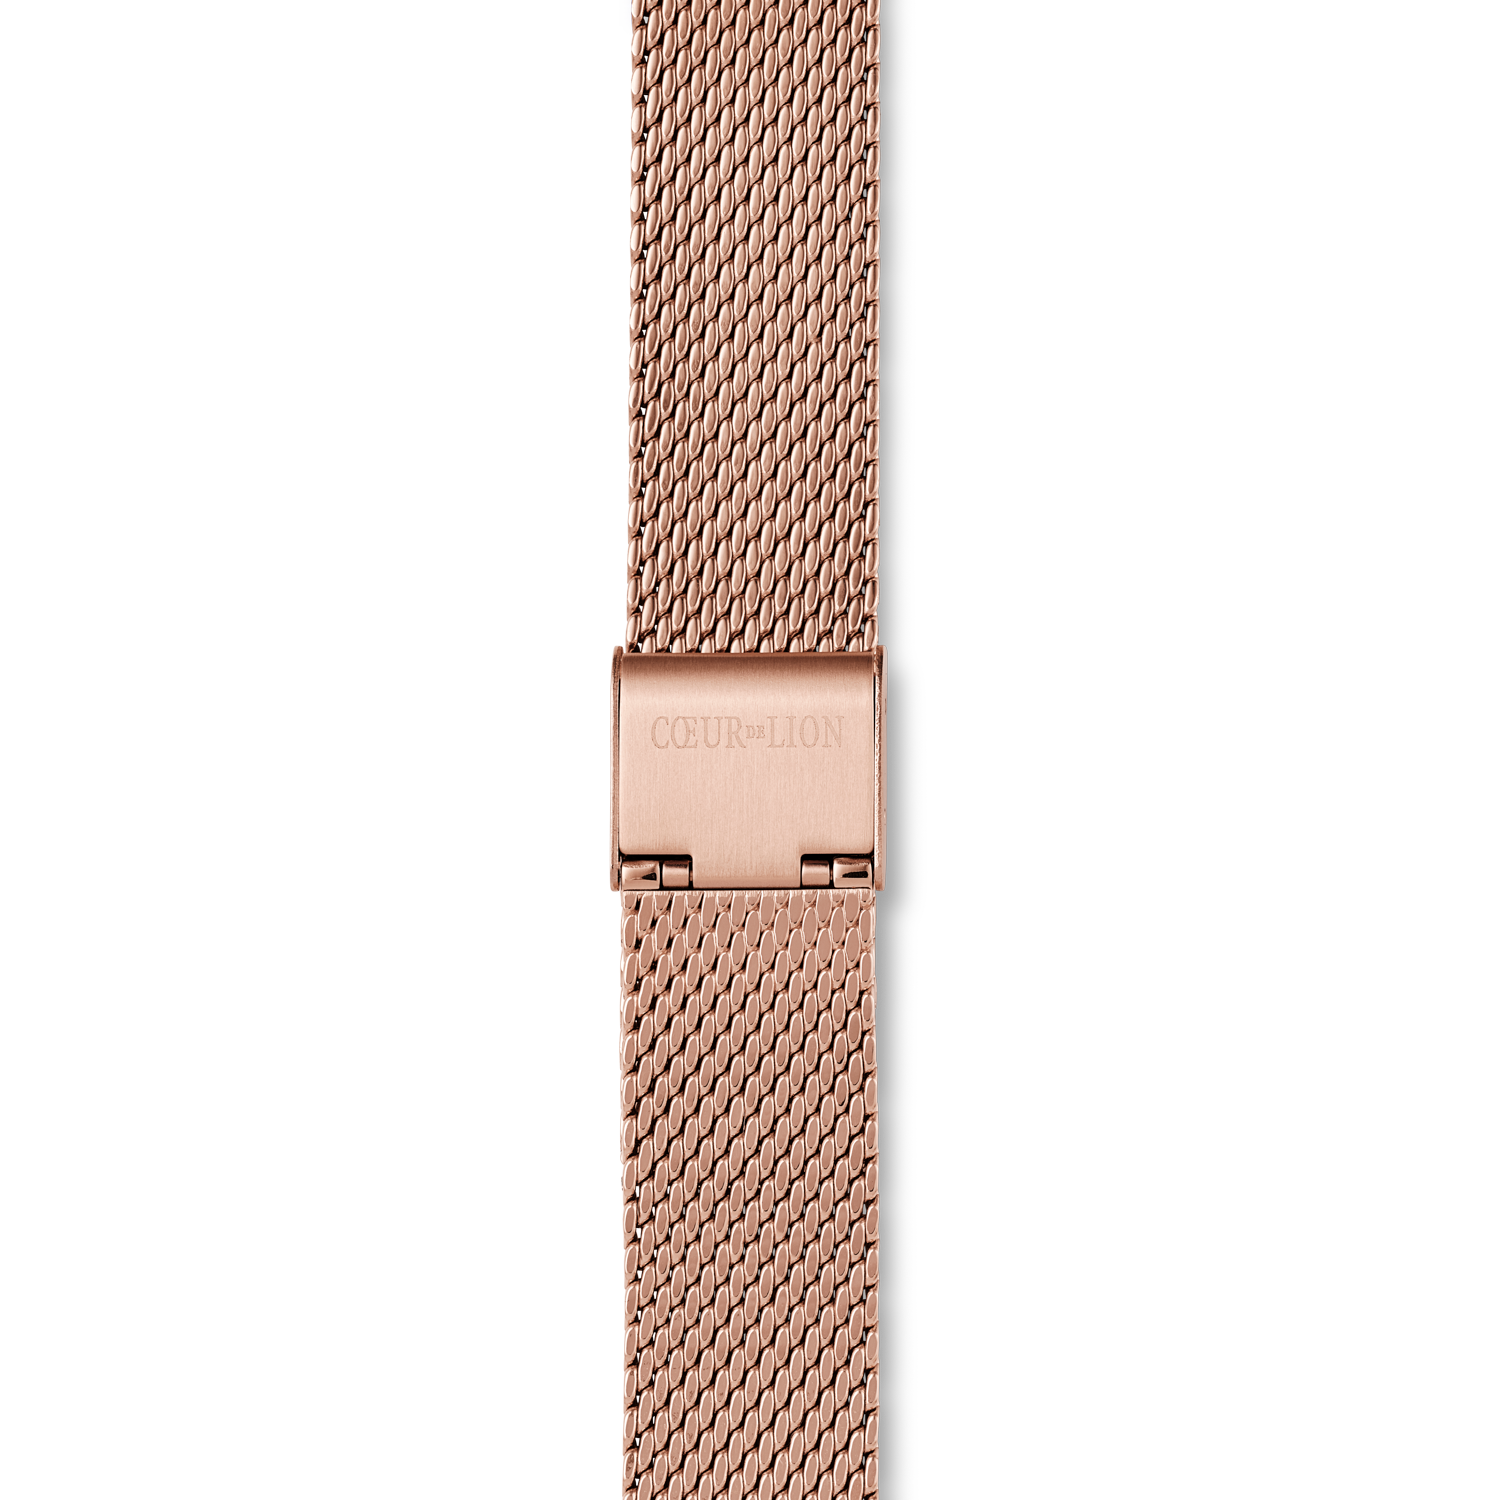 Watch Iconic Square Mocha Sunray Milanese Stainless Steel Rose Gold